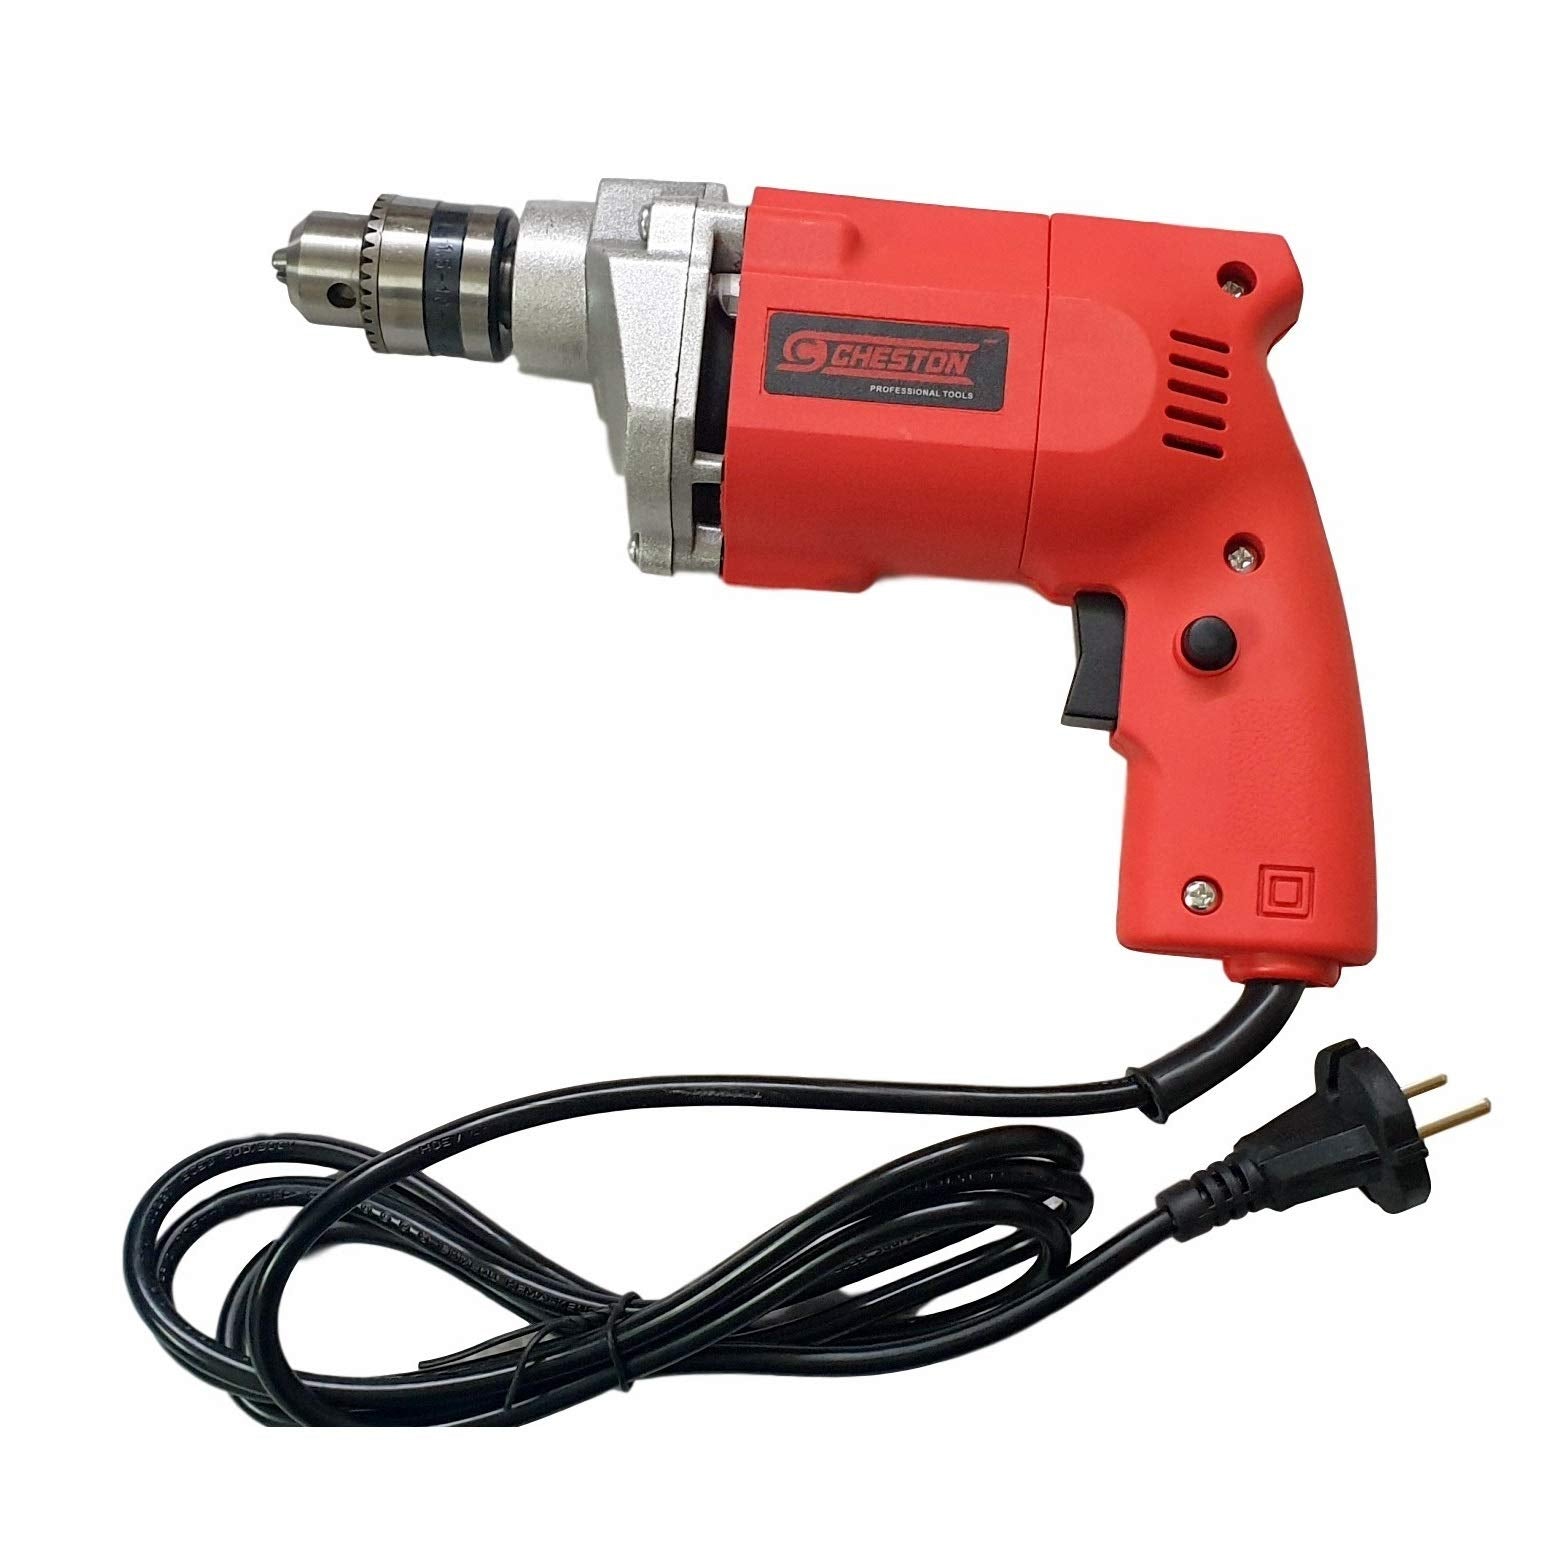 Cheston 10mm Powerful Drill Machine for Wall, Metal, Wood Drilling with 5 pcs Wall bits for Brick Wall Drilling